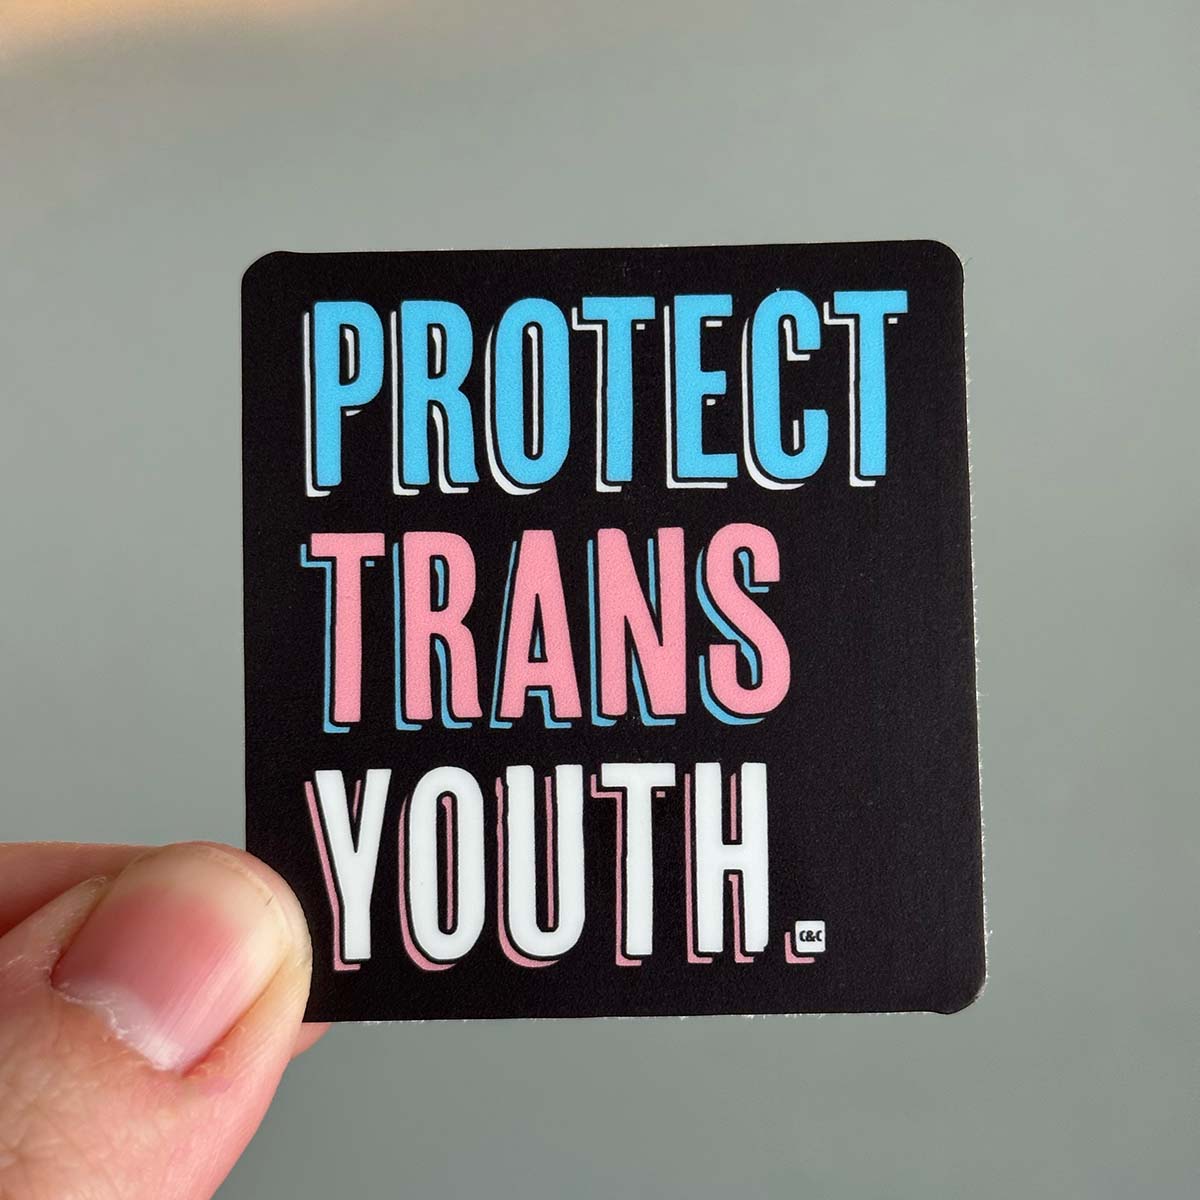 Protect Trans Youth Vinyl Sticker